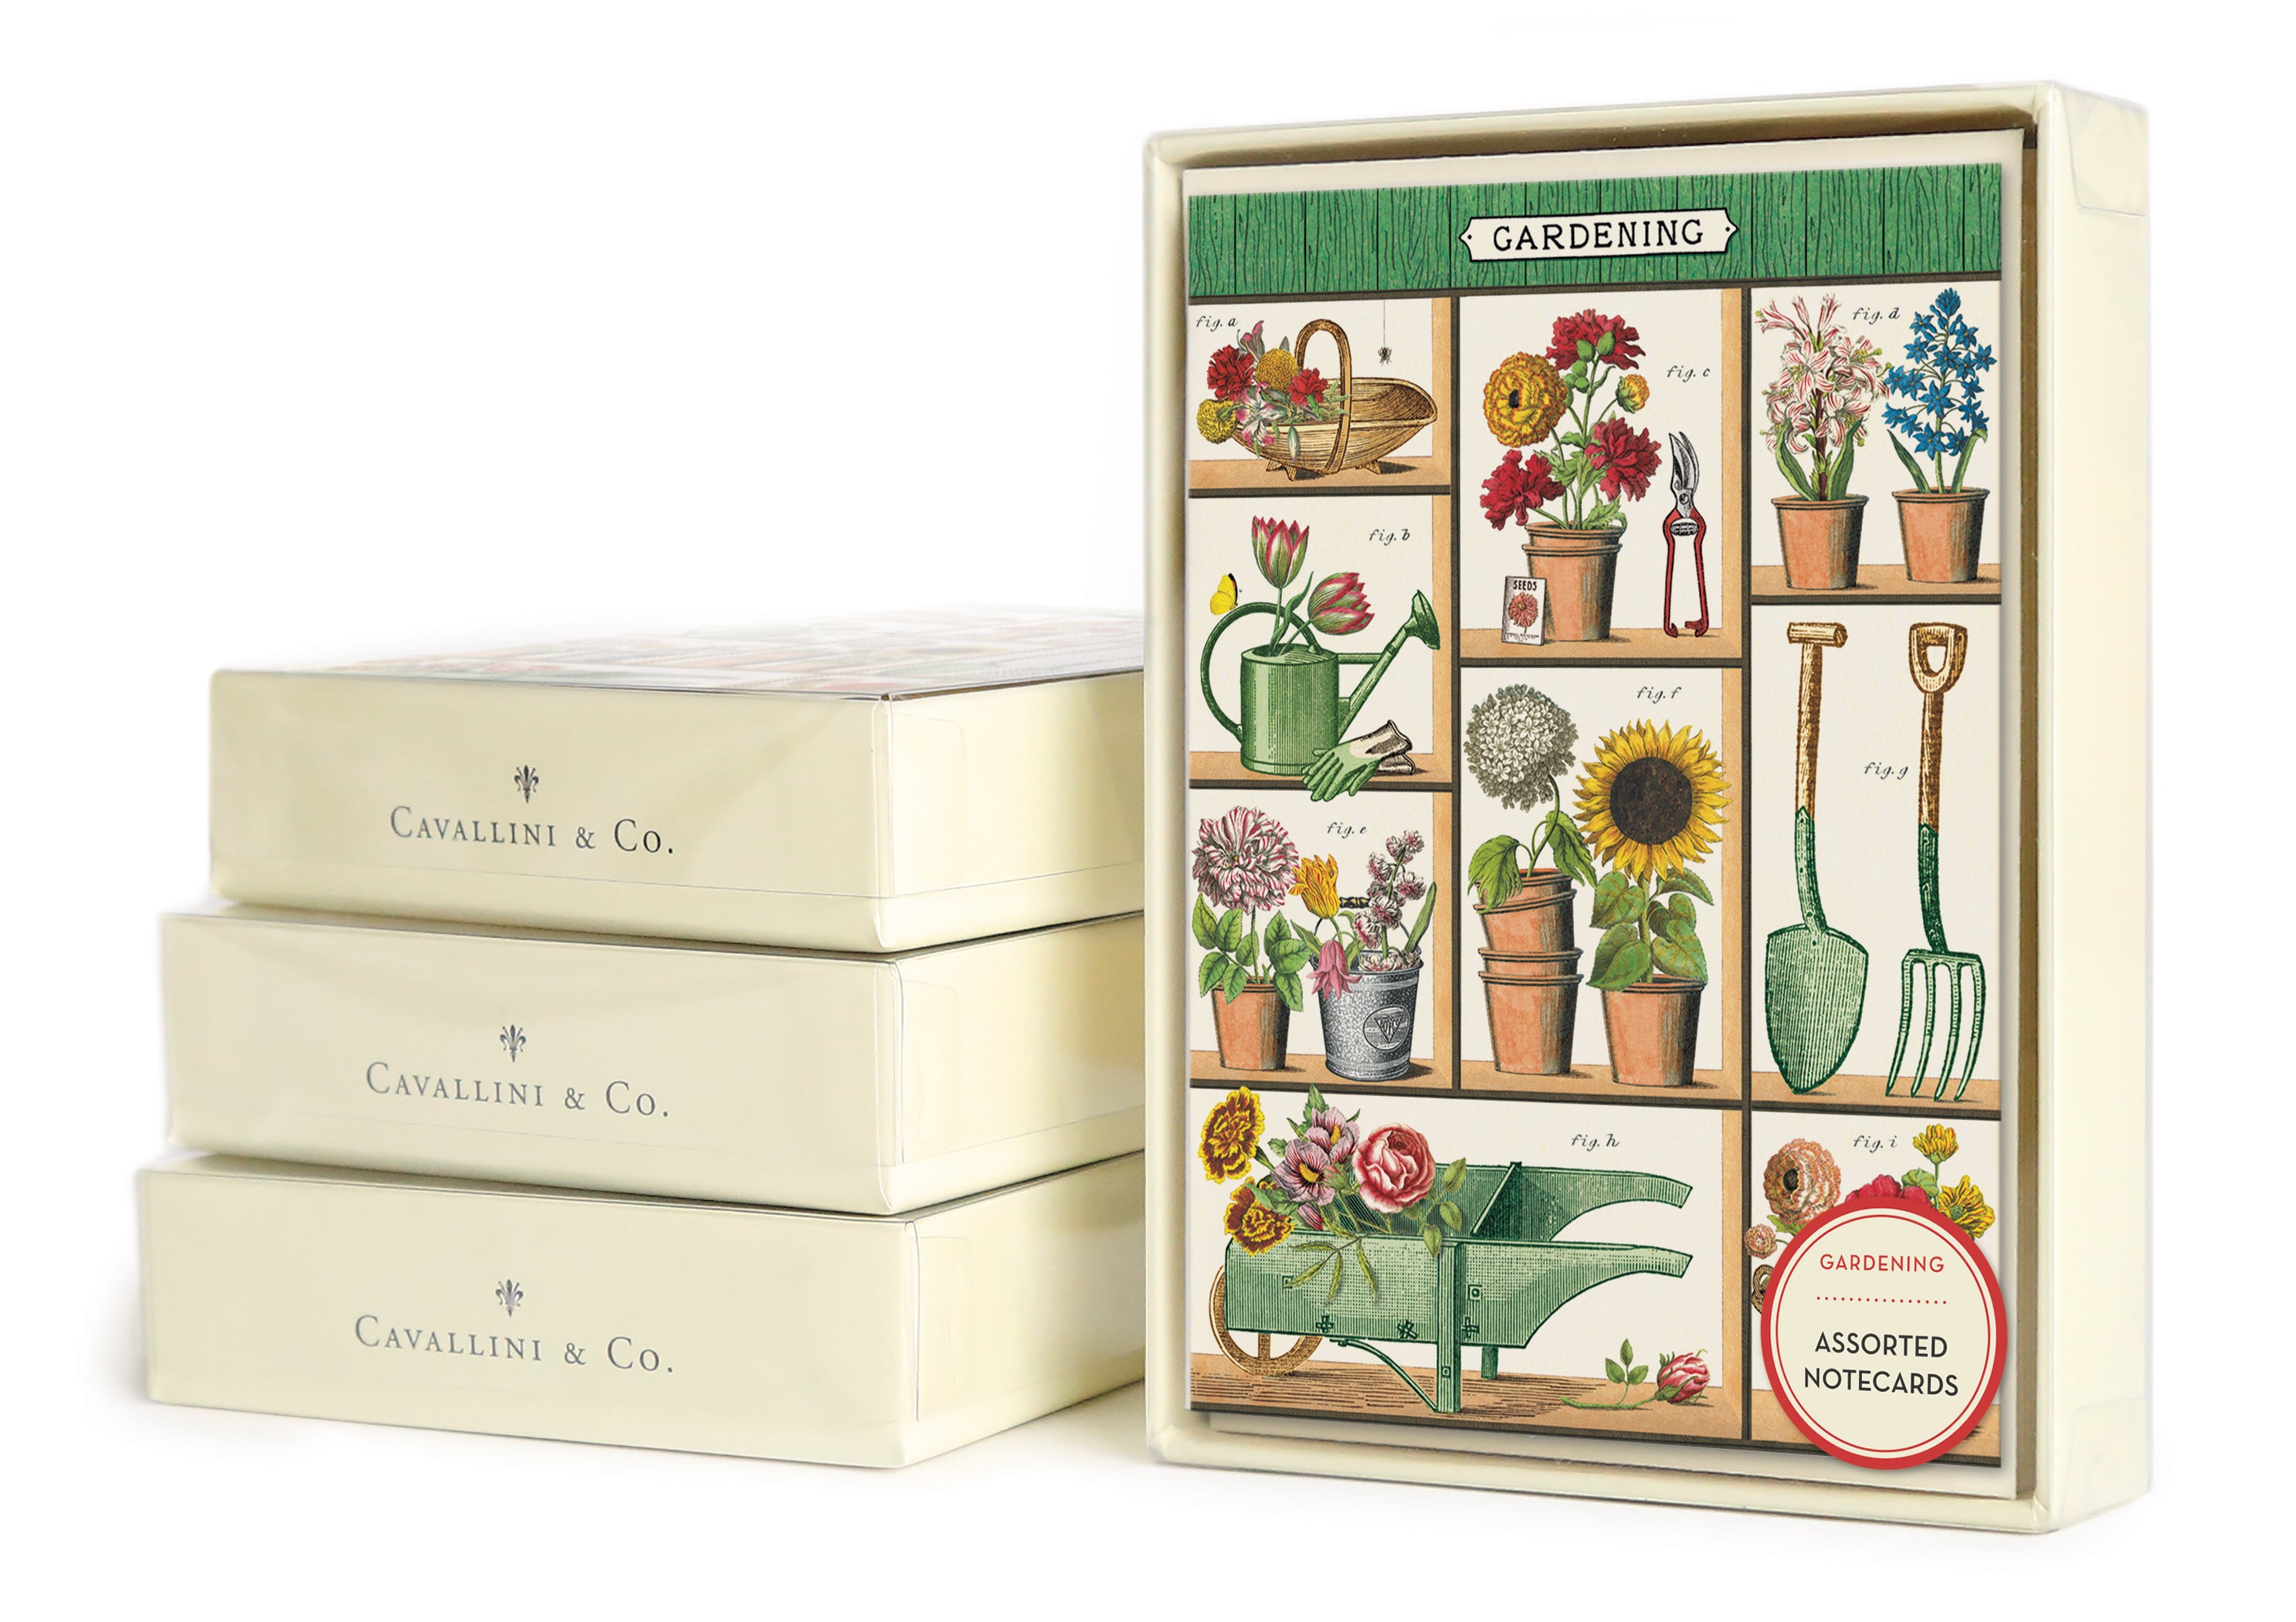 Cavallini & Co's. Gardening Boxed Notecard set is all about the beauty and color of a garden setting. 